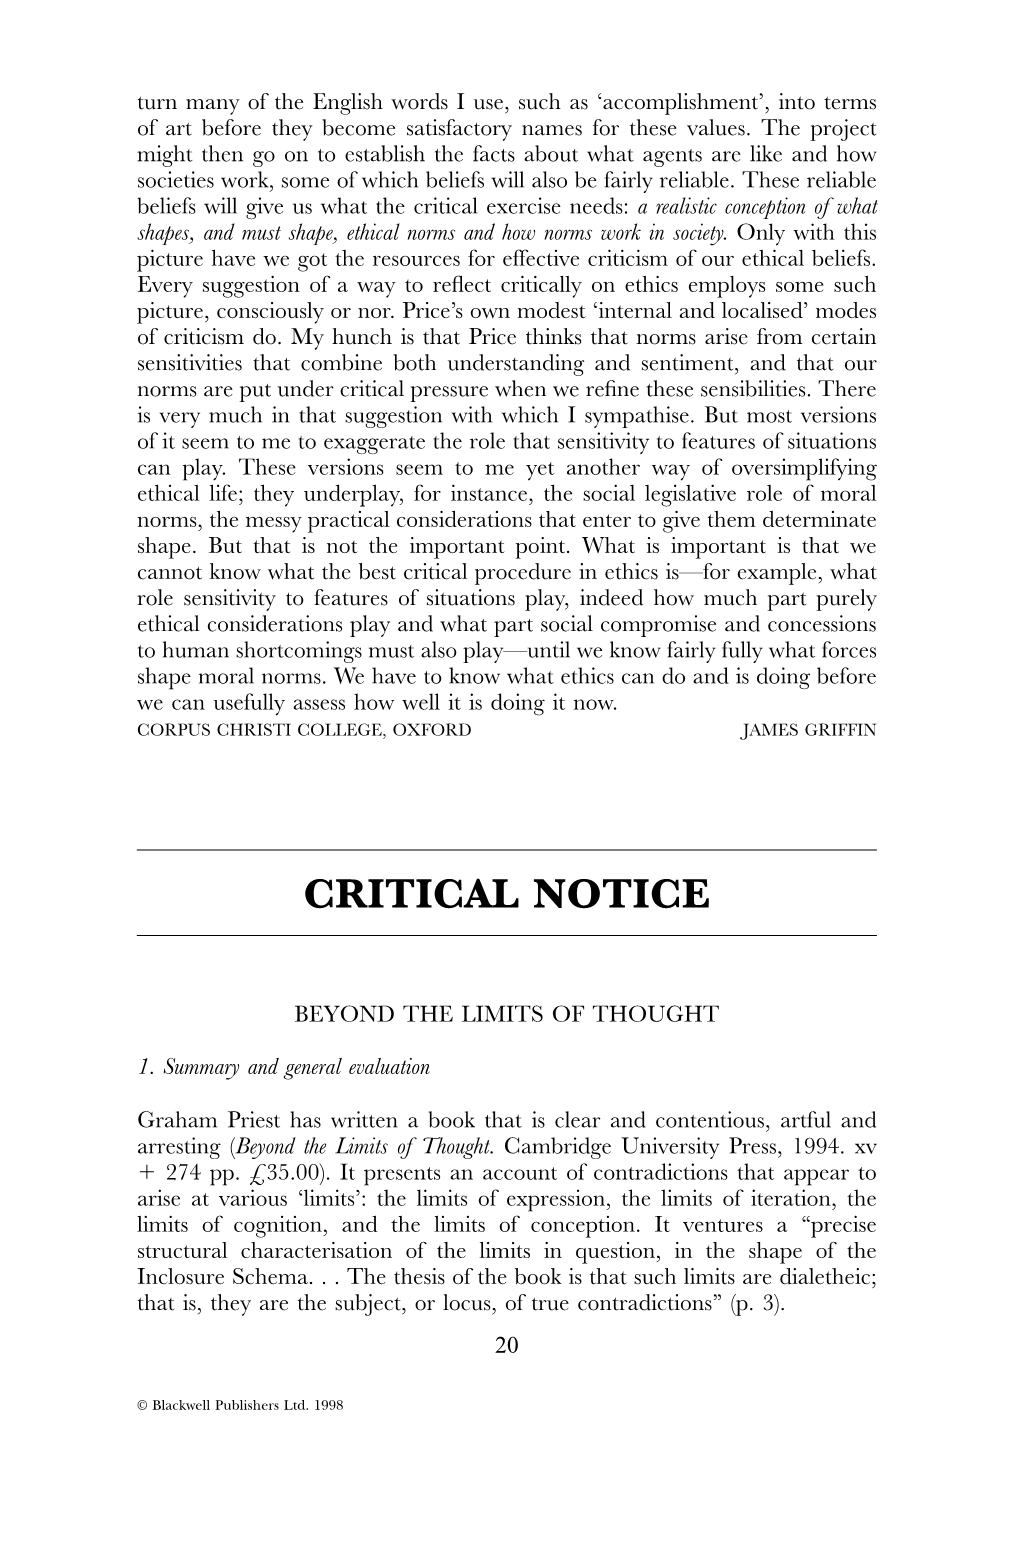 Critical Notice on G.Priest, Beyond the Limits of Thought, Cambridge